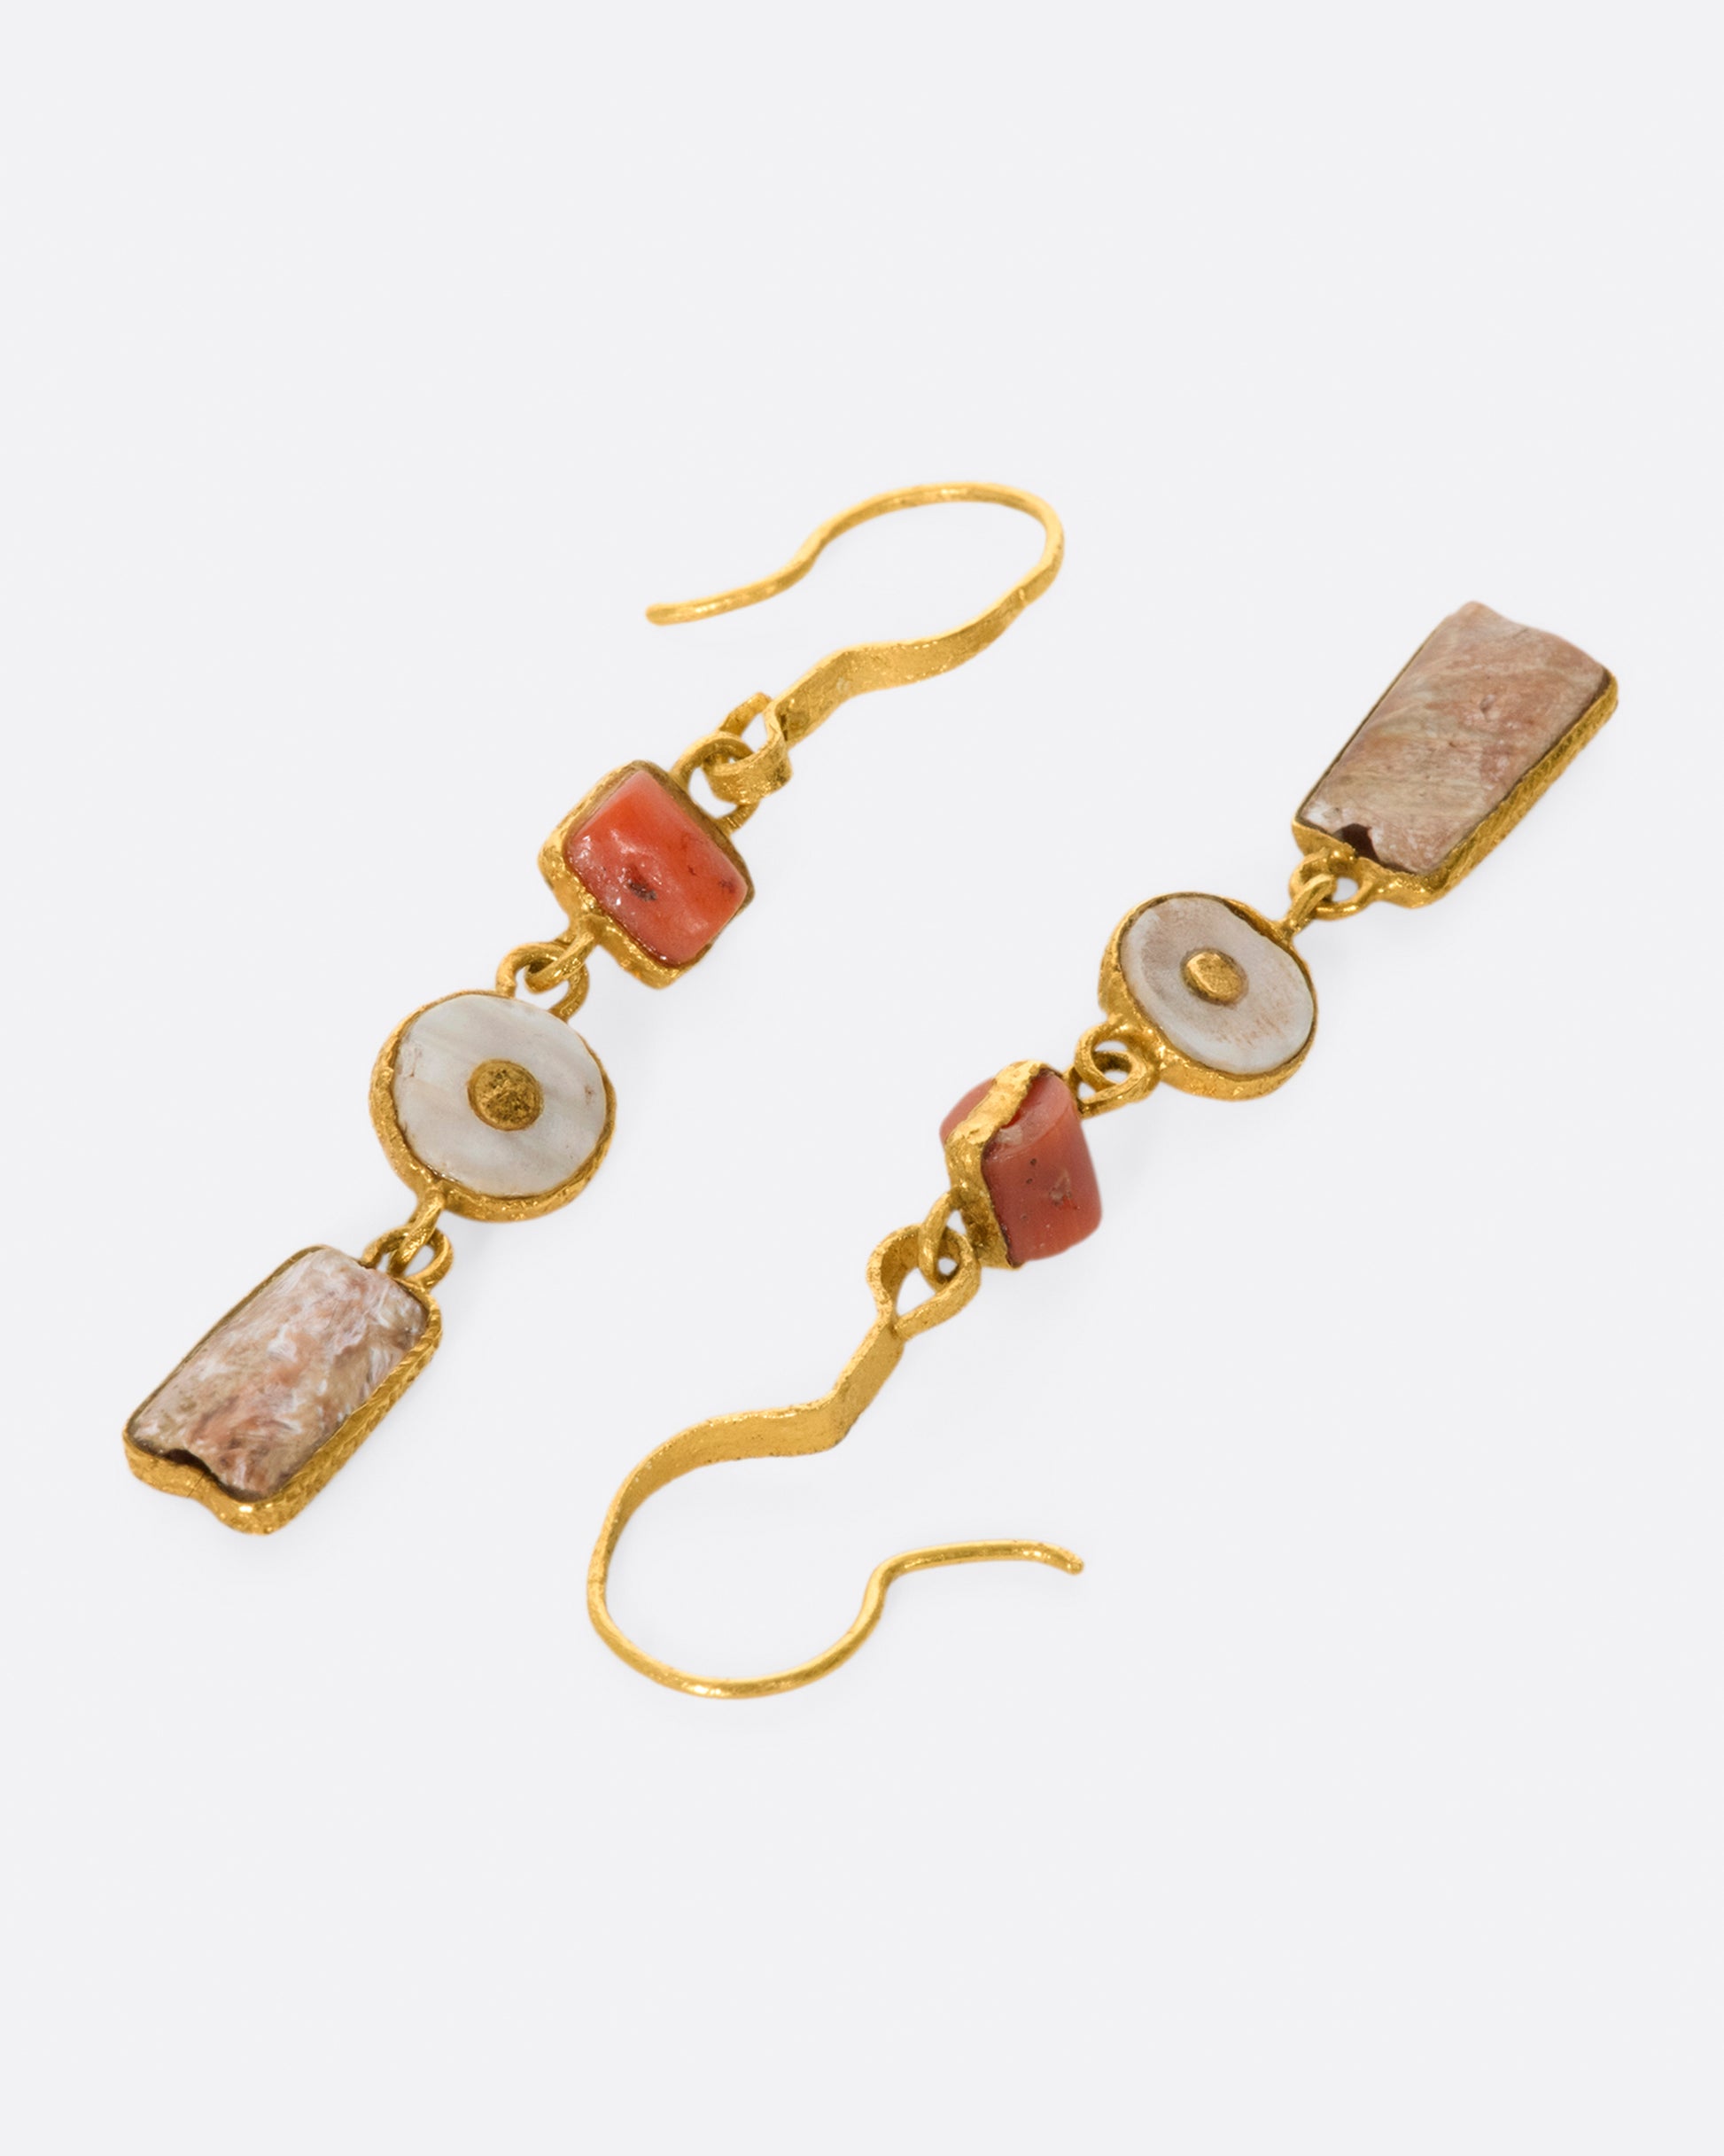 A pair of high karat gold triple drop earrings with coral and clay fragments